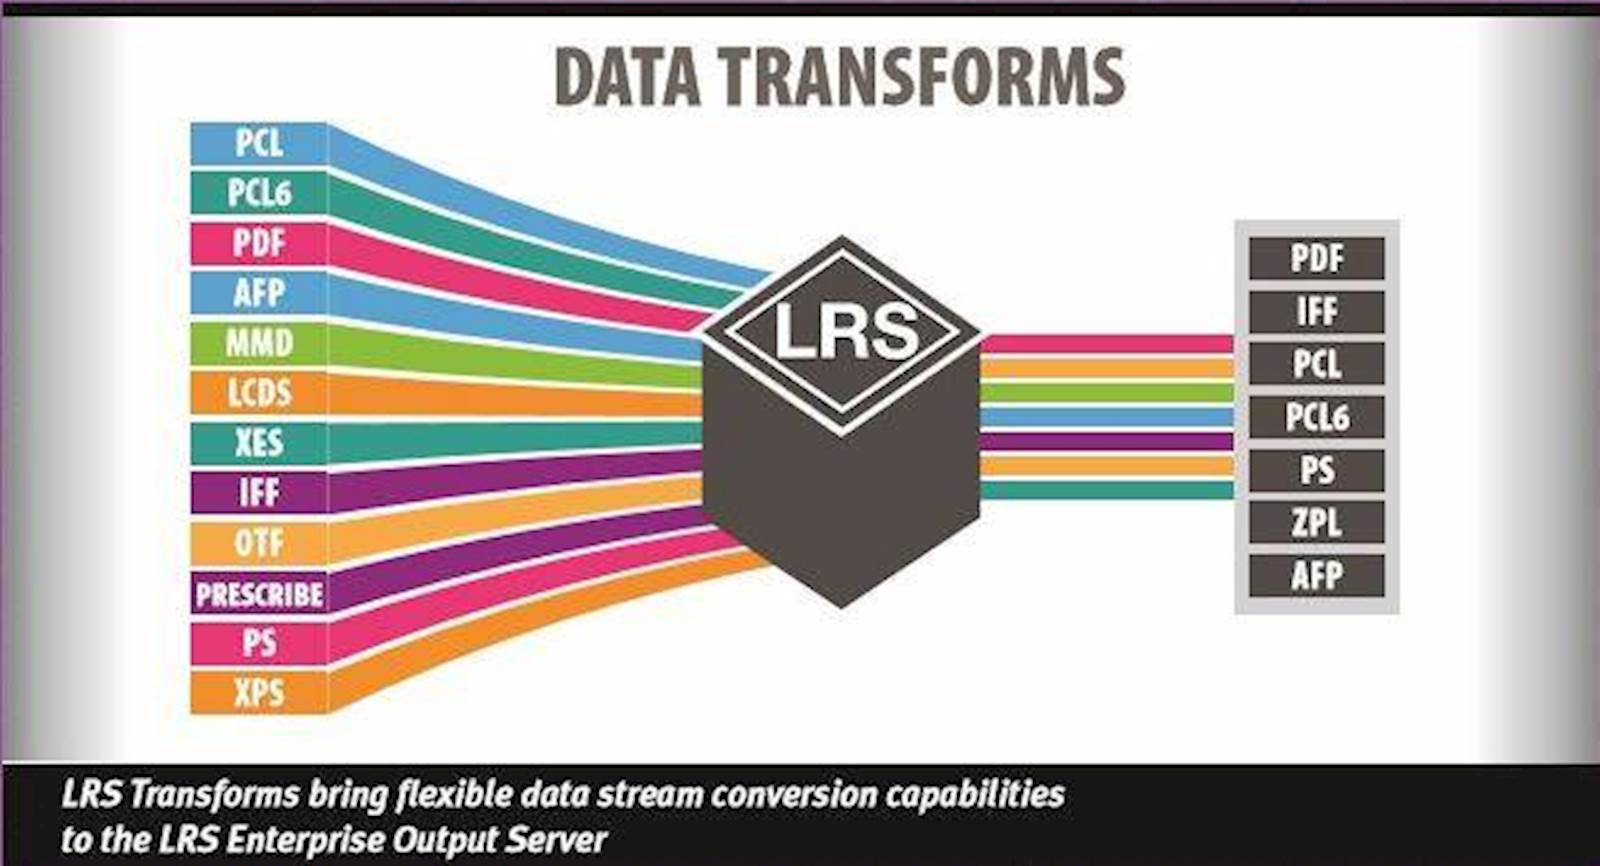 LRS Data Transforms convert data streams to the right output for your printer